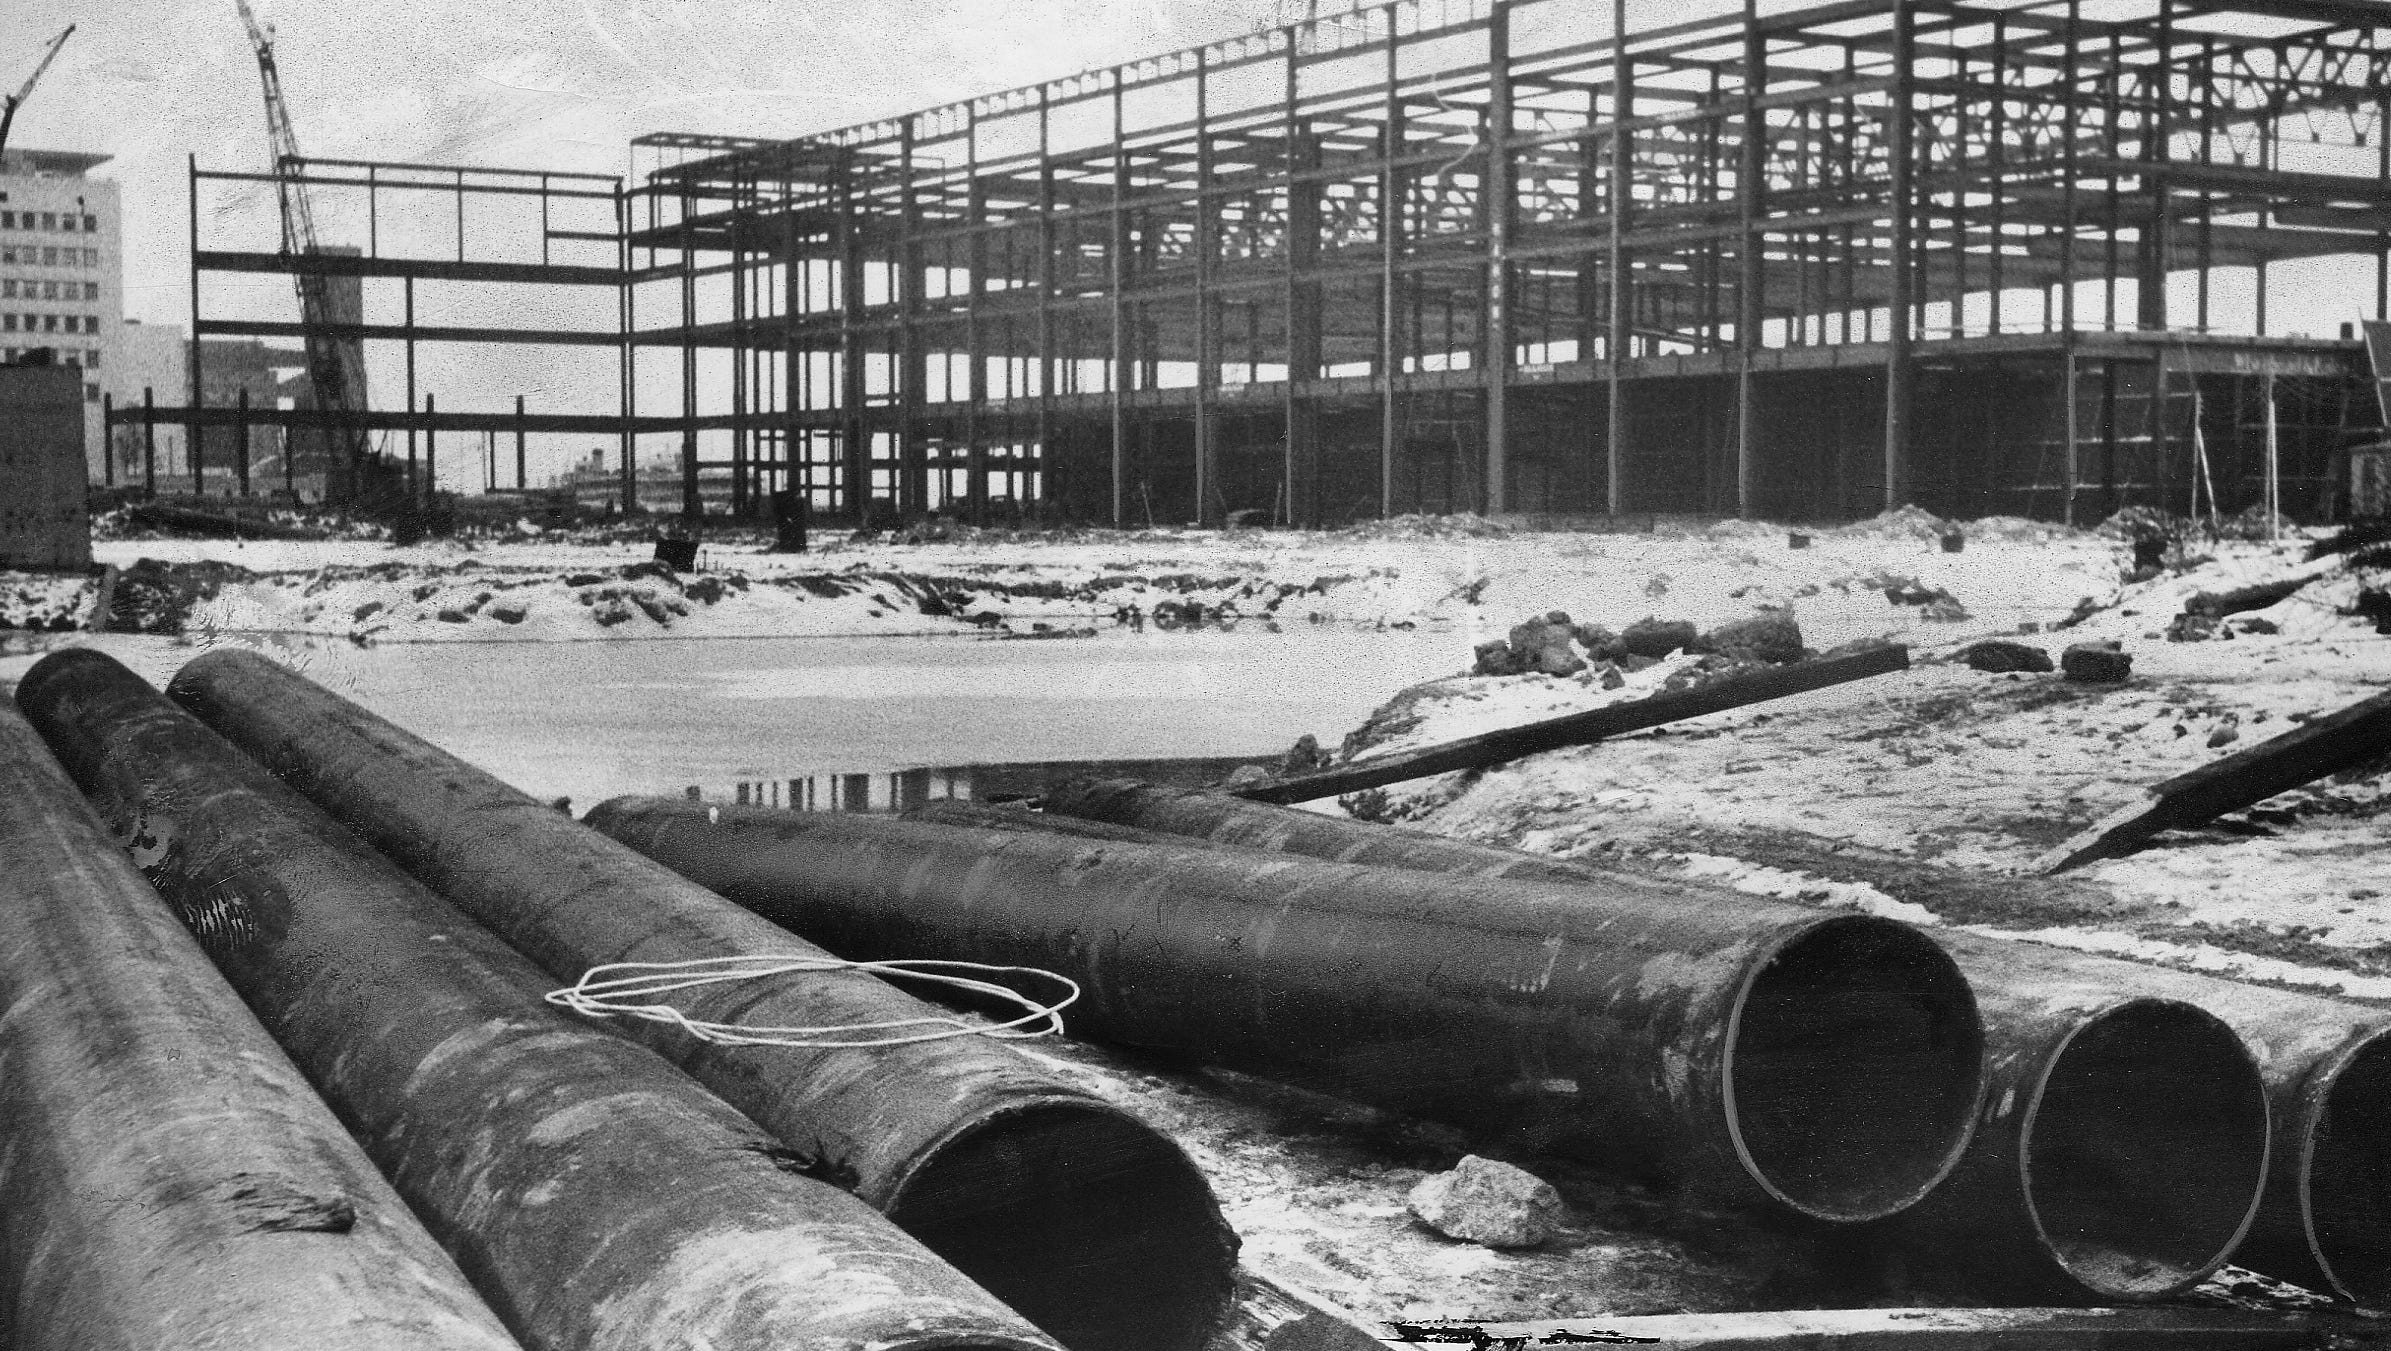 Another photo from Cobo Hall's construction on Aug. 6, 1958.